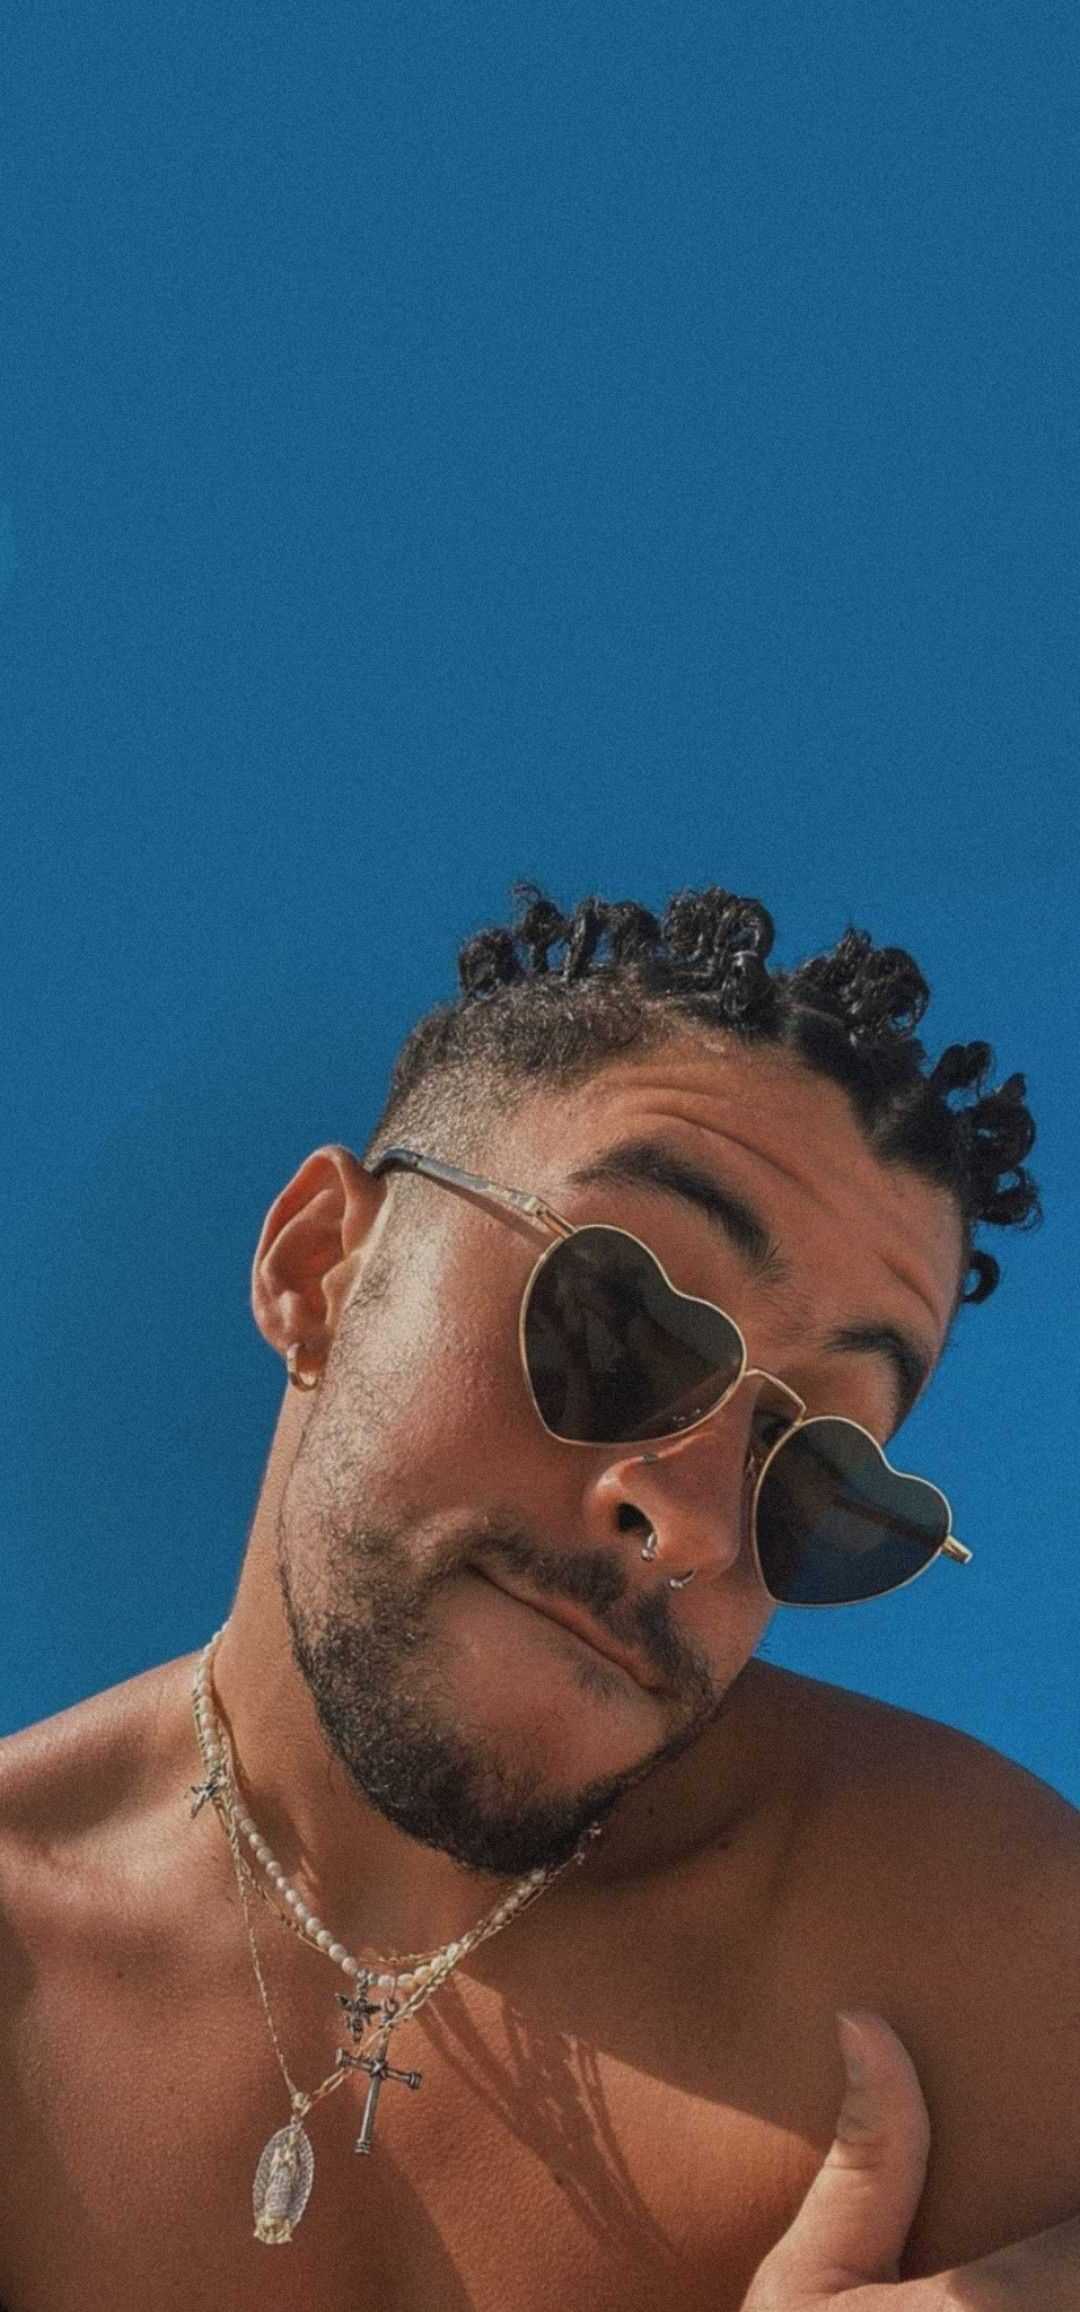 A man in sunglasses and shirtless - Bad Bunny